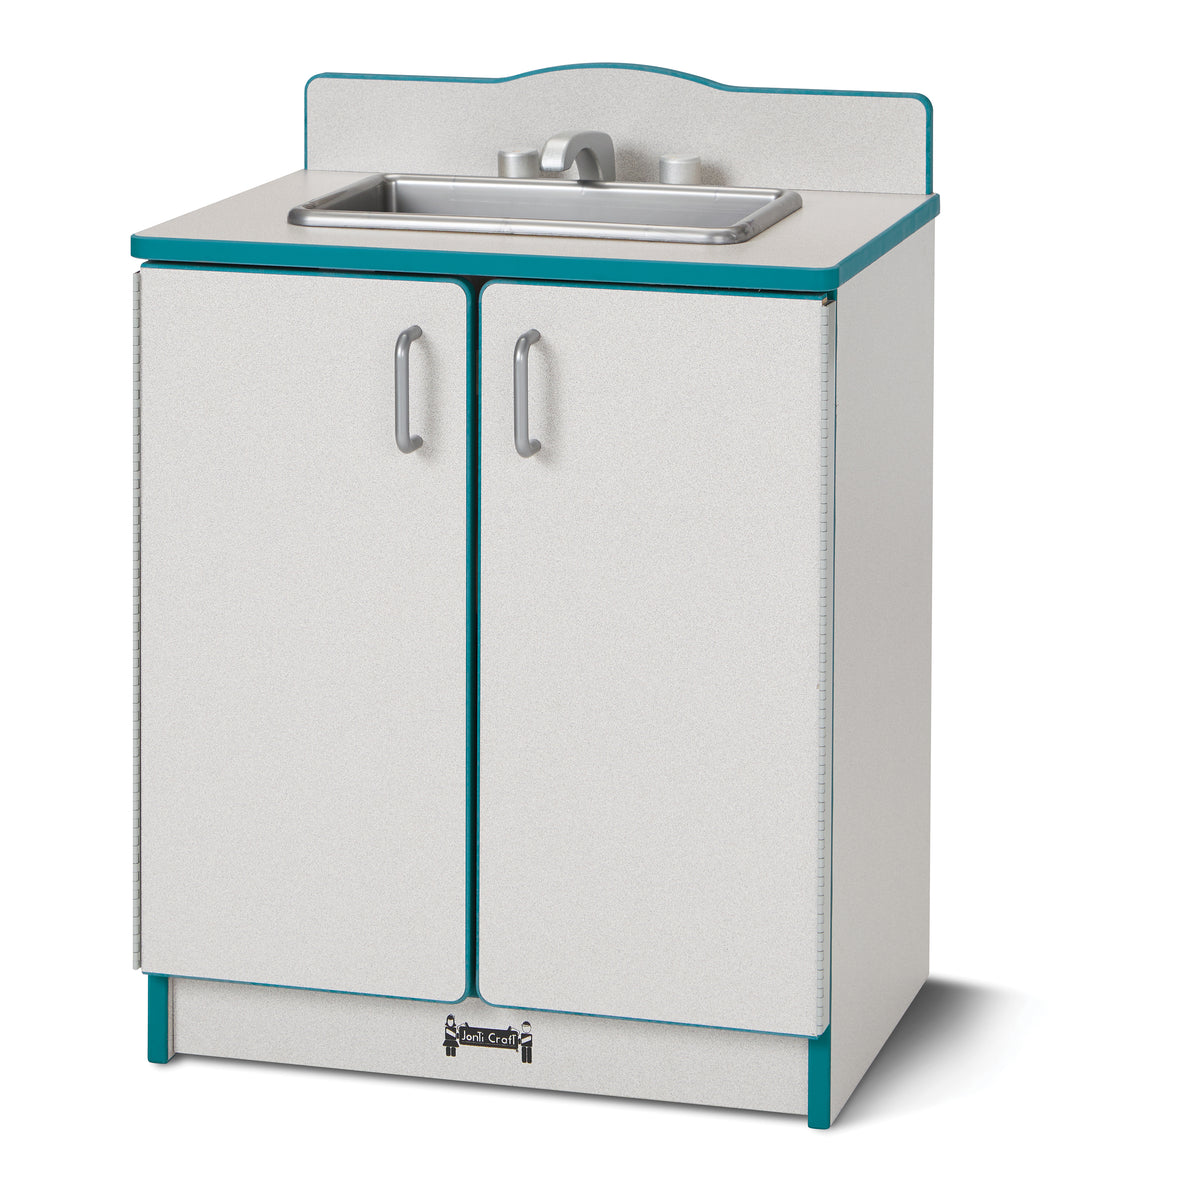 2408JCWW005, Rainbow Accents Culinary Creations Kitchen Sink - Teal